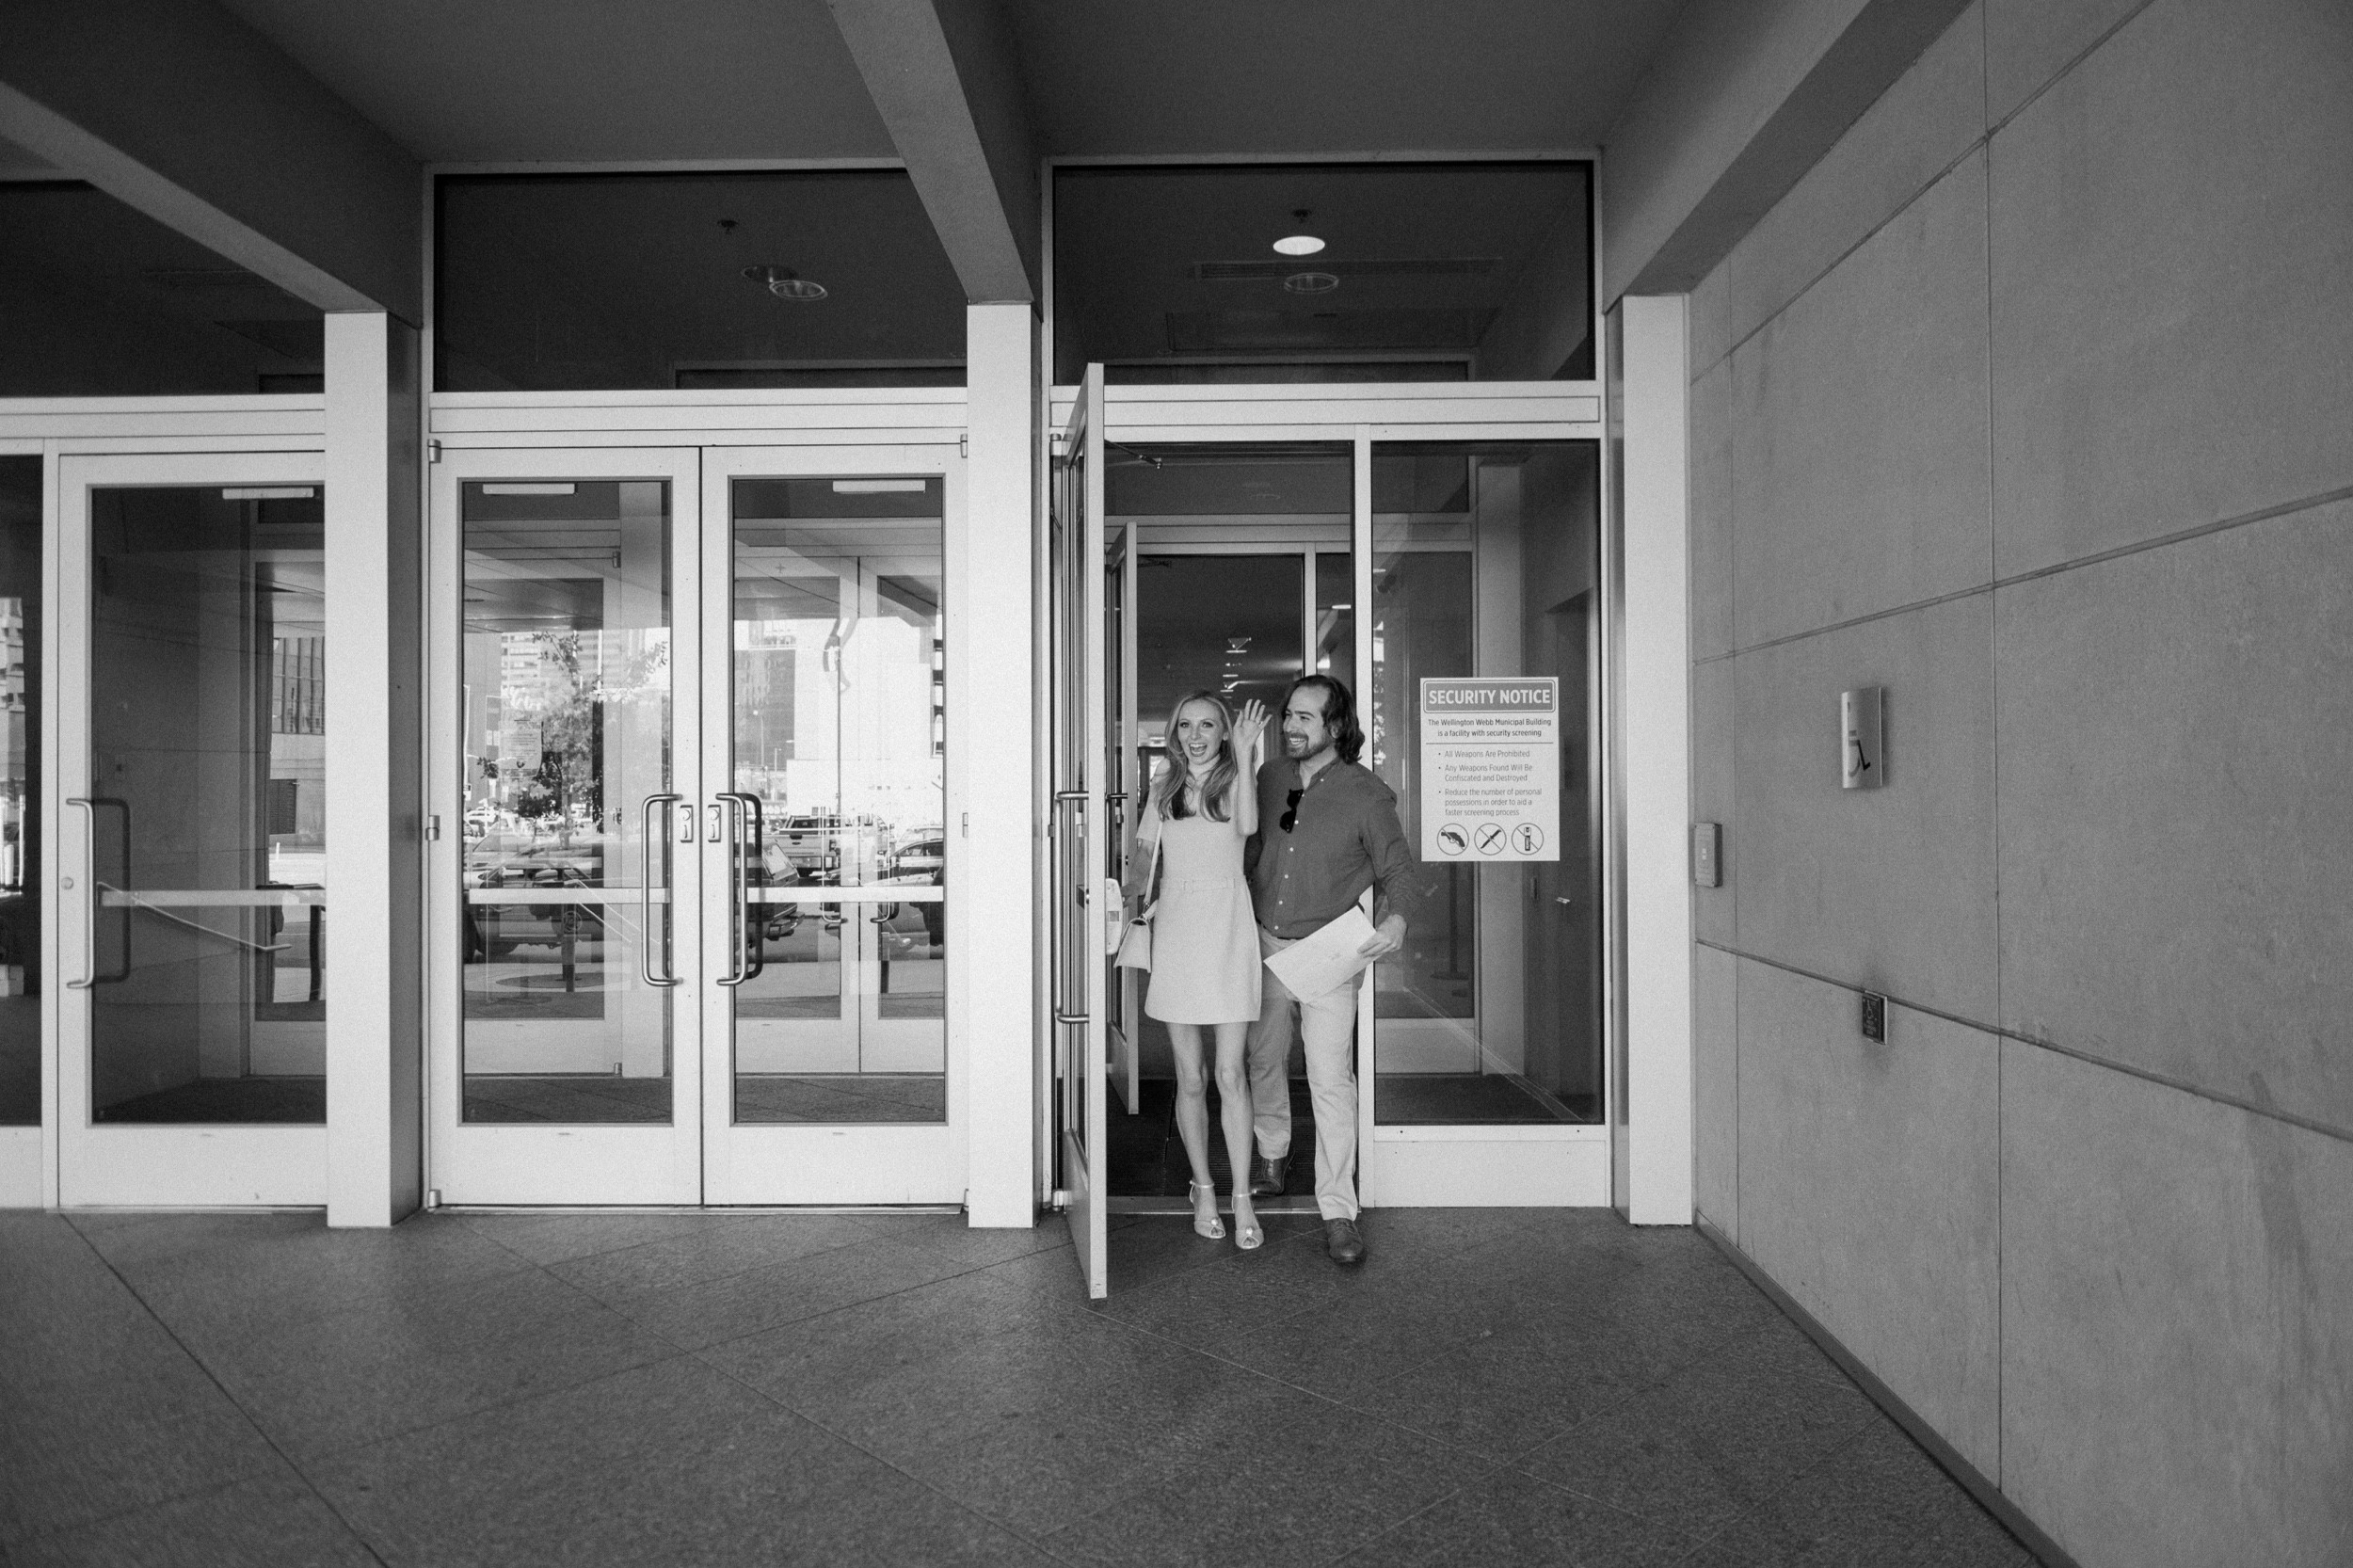 Courthouse wedding in downtown Denver for a Colorado elopement couple. Photo by Denver elopement photographer Ashley Joyce Photography, copyright 2022.